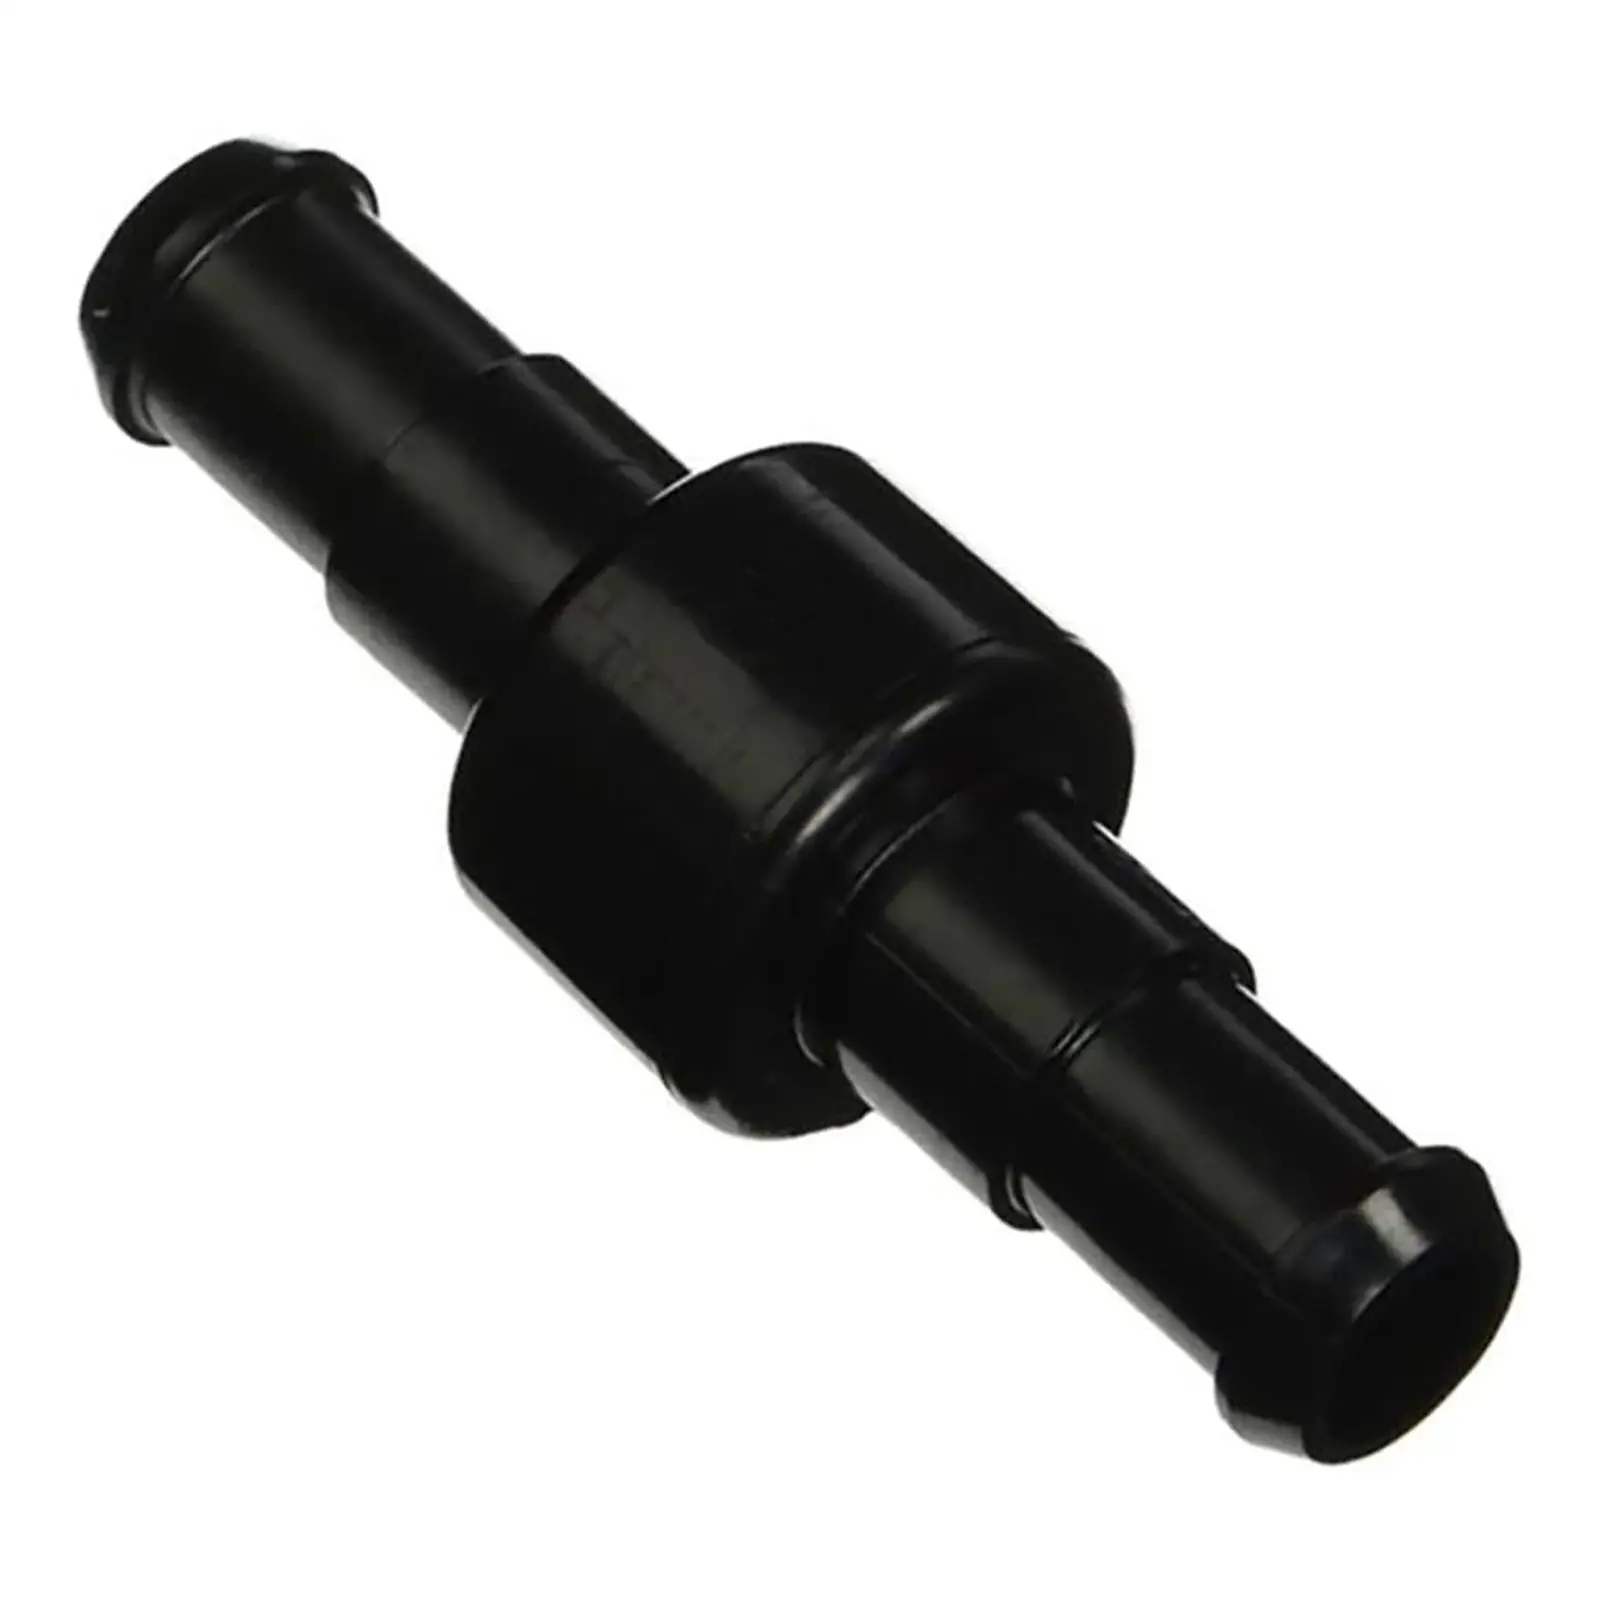 Pool Cleaner Hose Swivel Replaces Part Easy to Install Pool Hose Swivel Adapter Fittings for 280 Black F5B Pool Cleaner